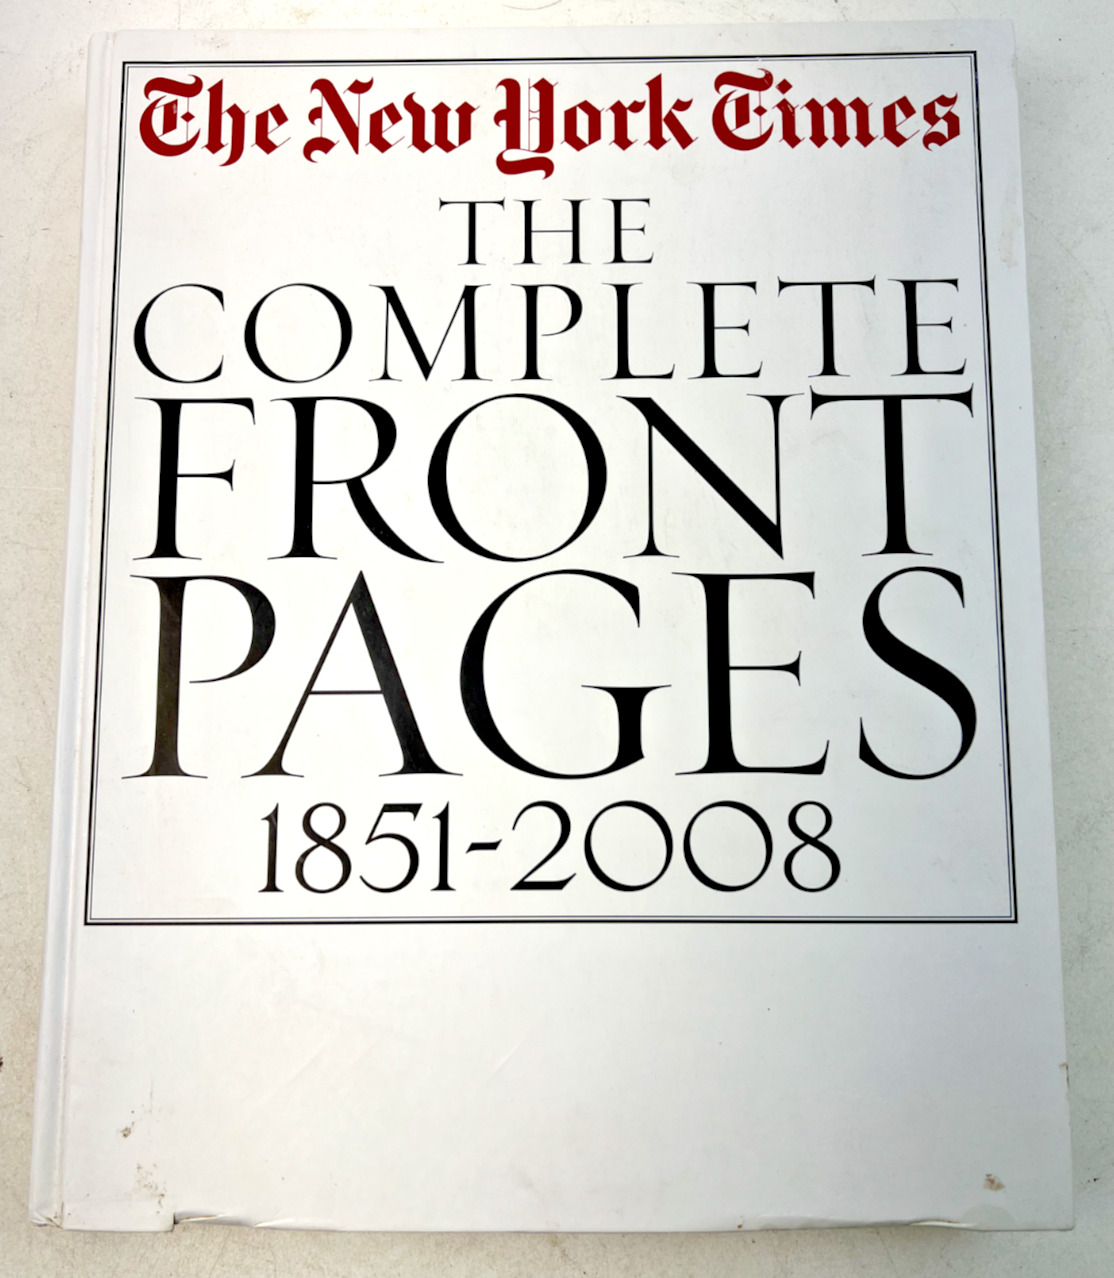 The New York Times: The Complete Front Pages: 1851-2008